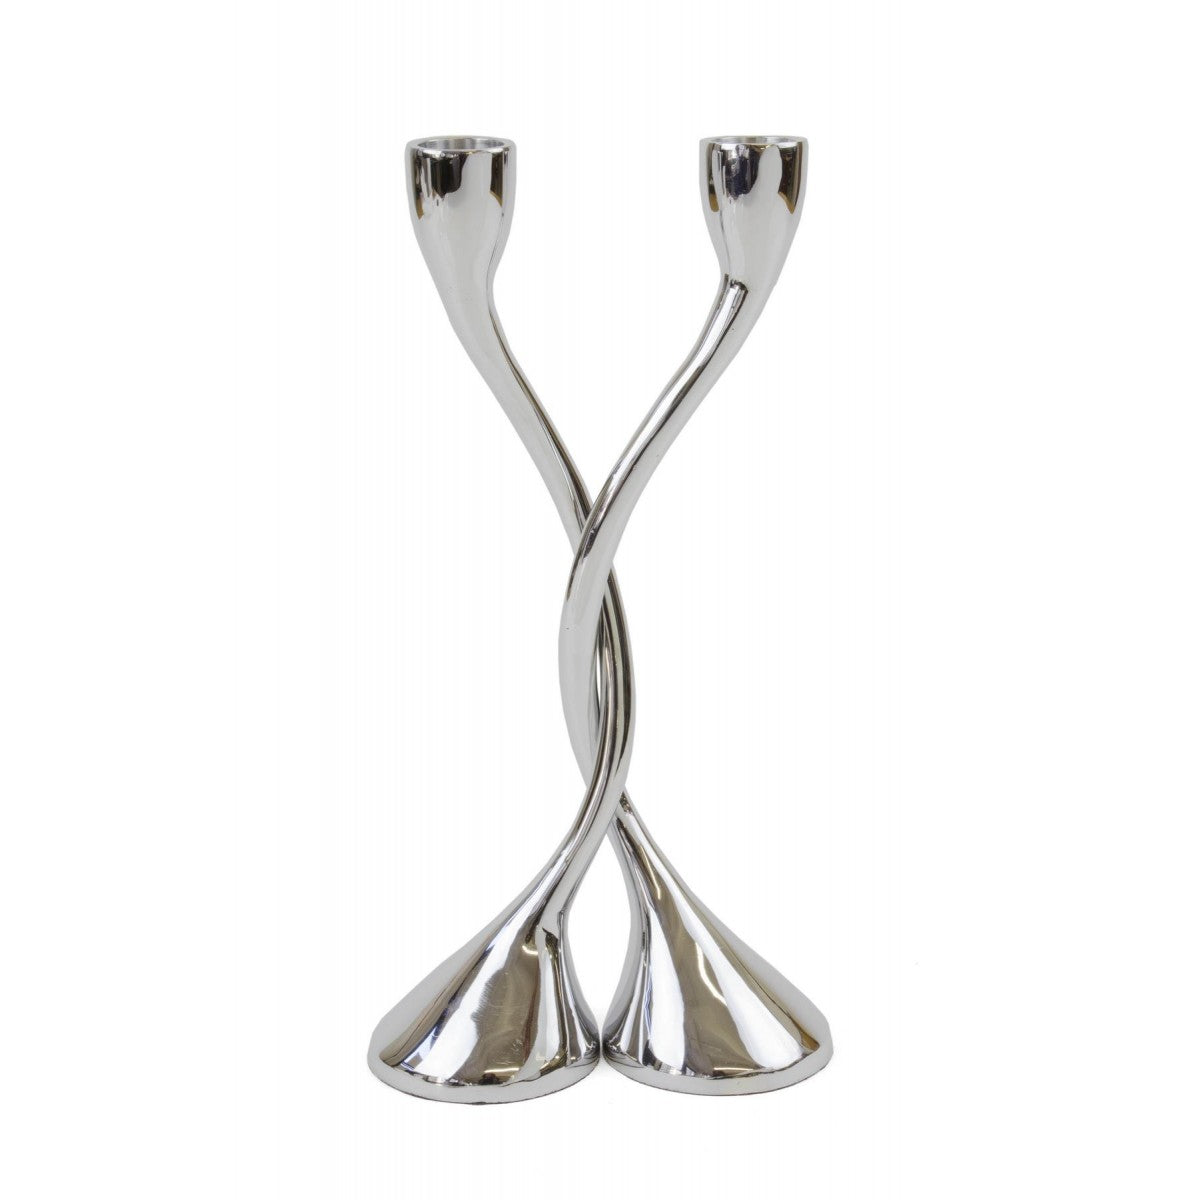 Entwined Candle Holders